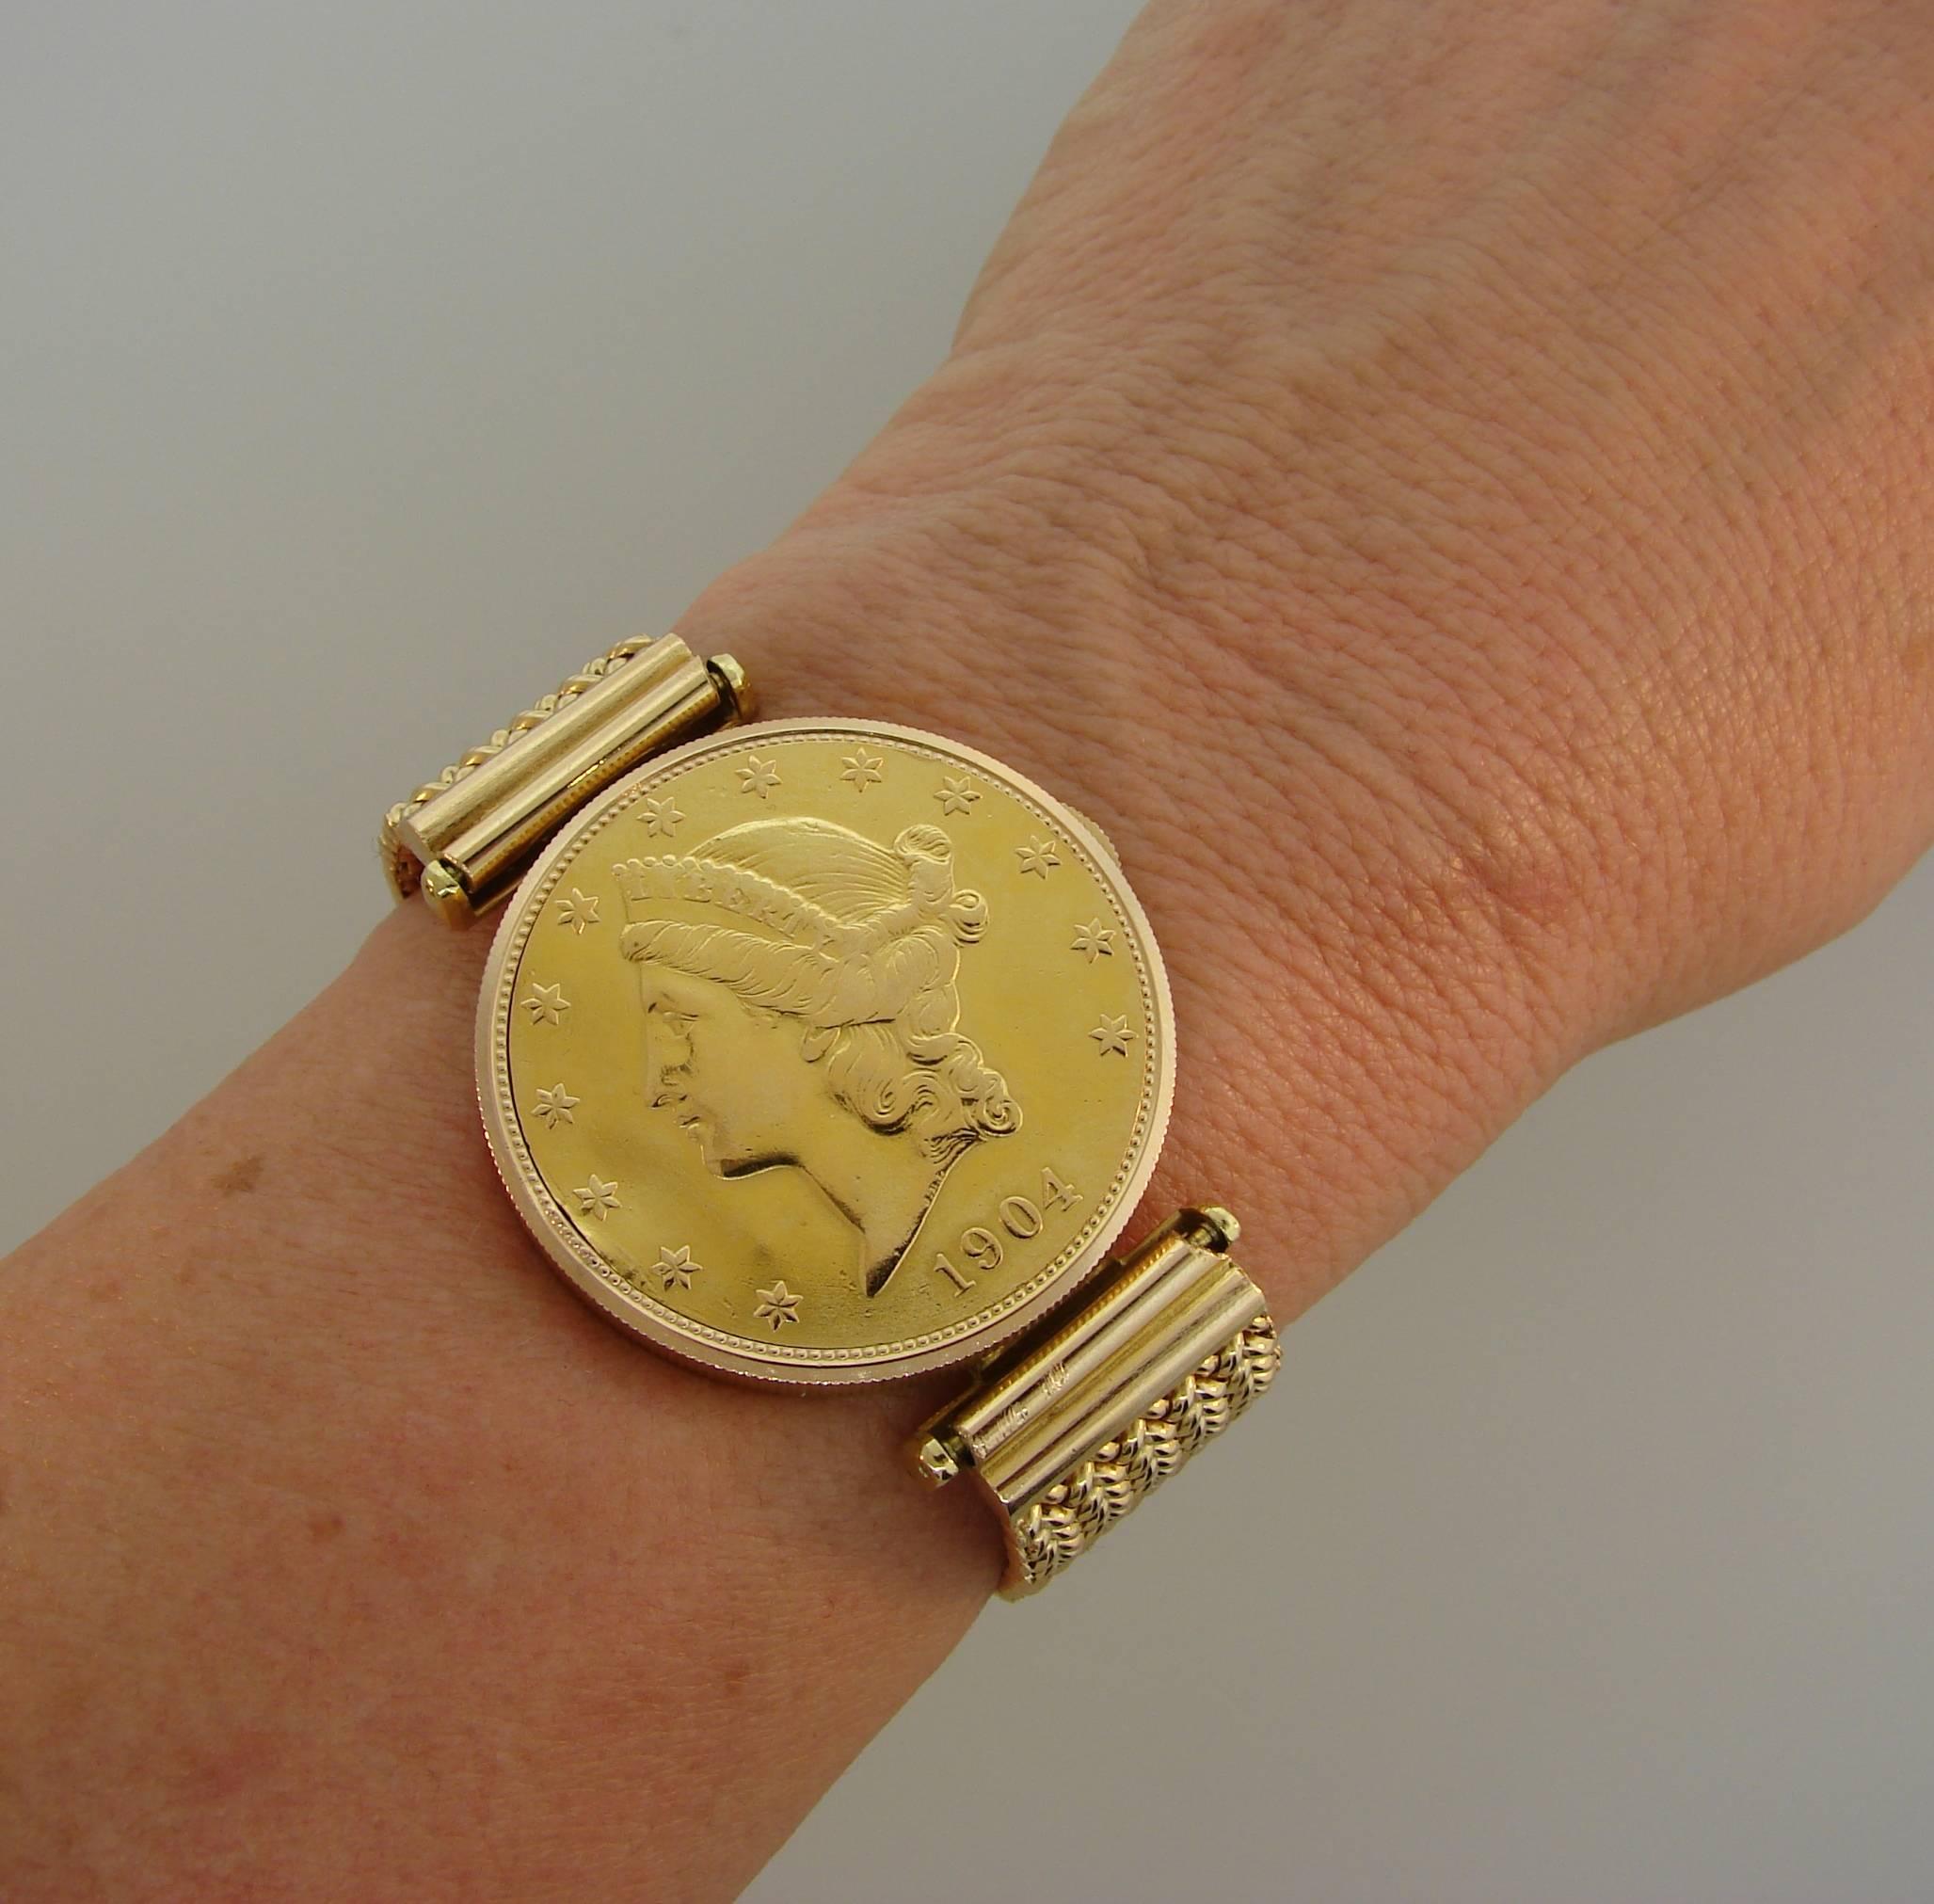 Unusual 1904 US Twenty Dollar Gold Coin watch created by Corum. Unique, classy and elegant,  it is a great addition to your watch and jewelry collection.
33 mm case, Swiss made, mechanical movement, manual wind. All parts are original Corum. One